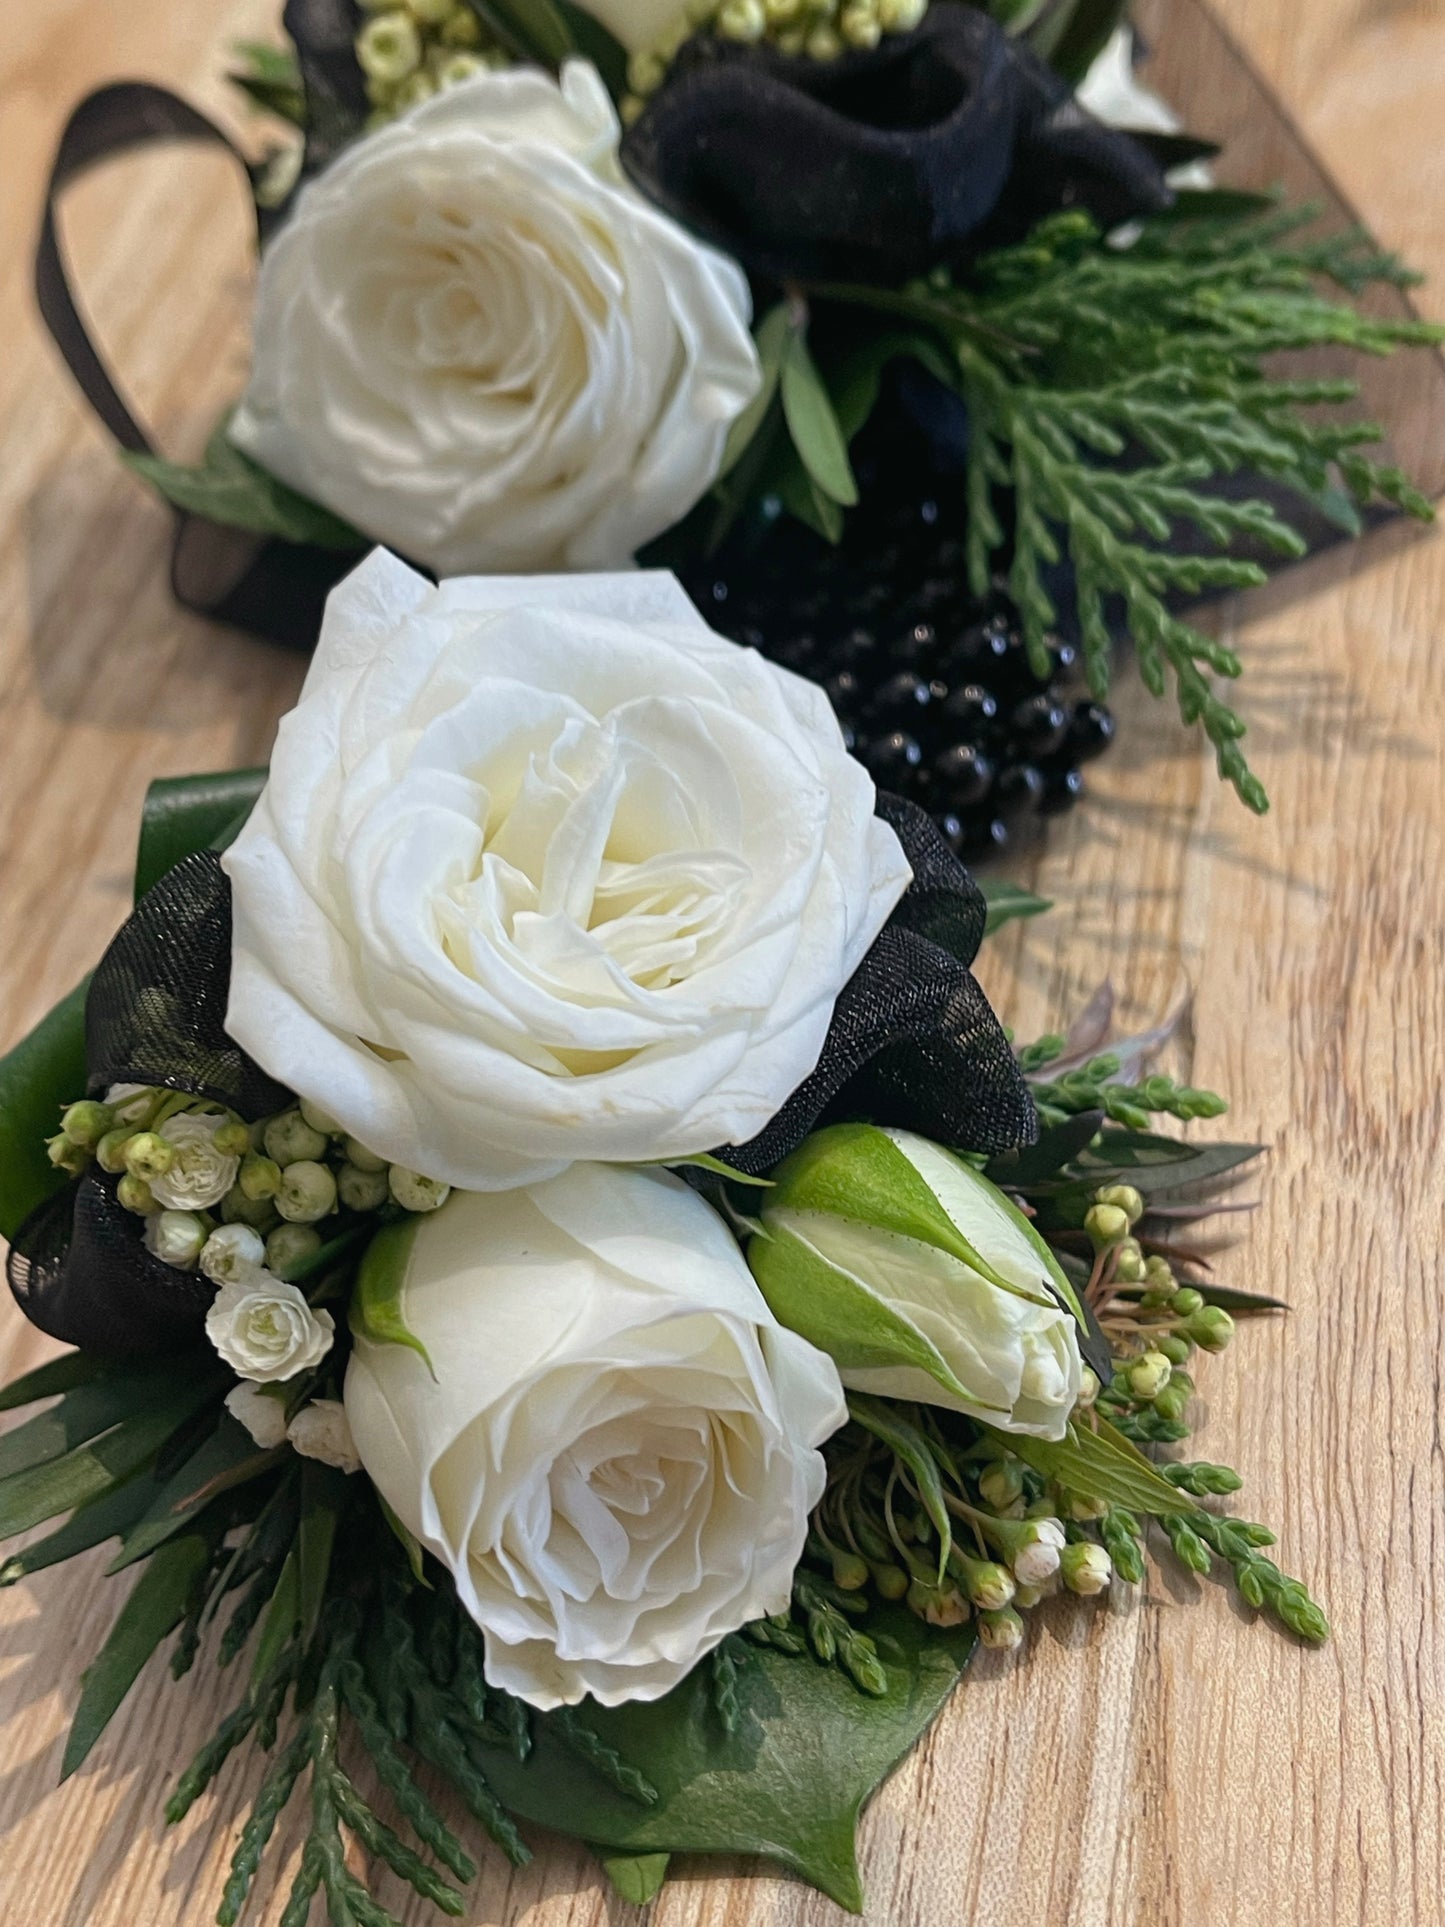 Flowersect, Floral, Bouquet, Flowers, Gifts, Posy, Posey, Wellington, Lower Hutt, Upper Hutt, Petone, Eastbourne, Bright, Pastel, Florist, Florists, Creative, Flair, custom, bespoke, bunch, bunches, scent, Corsage, Ball, Buttonhole